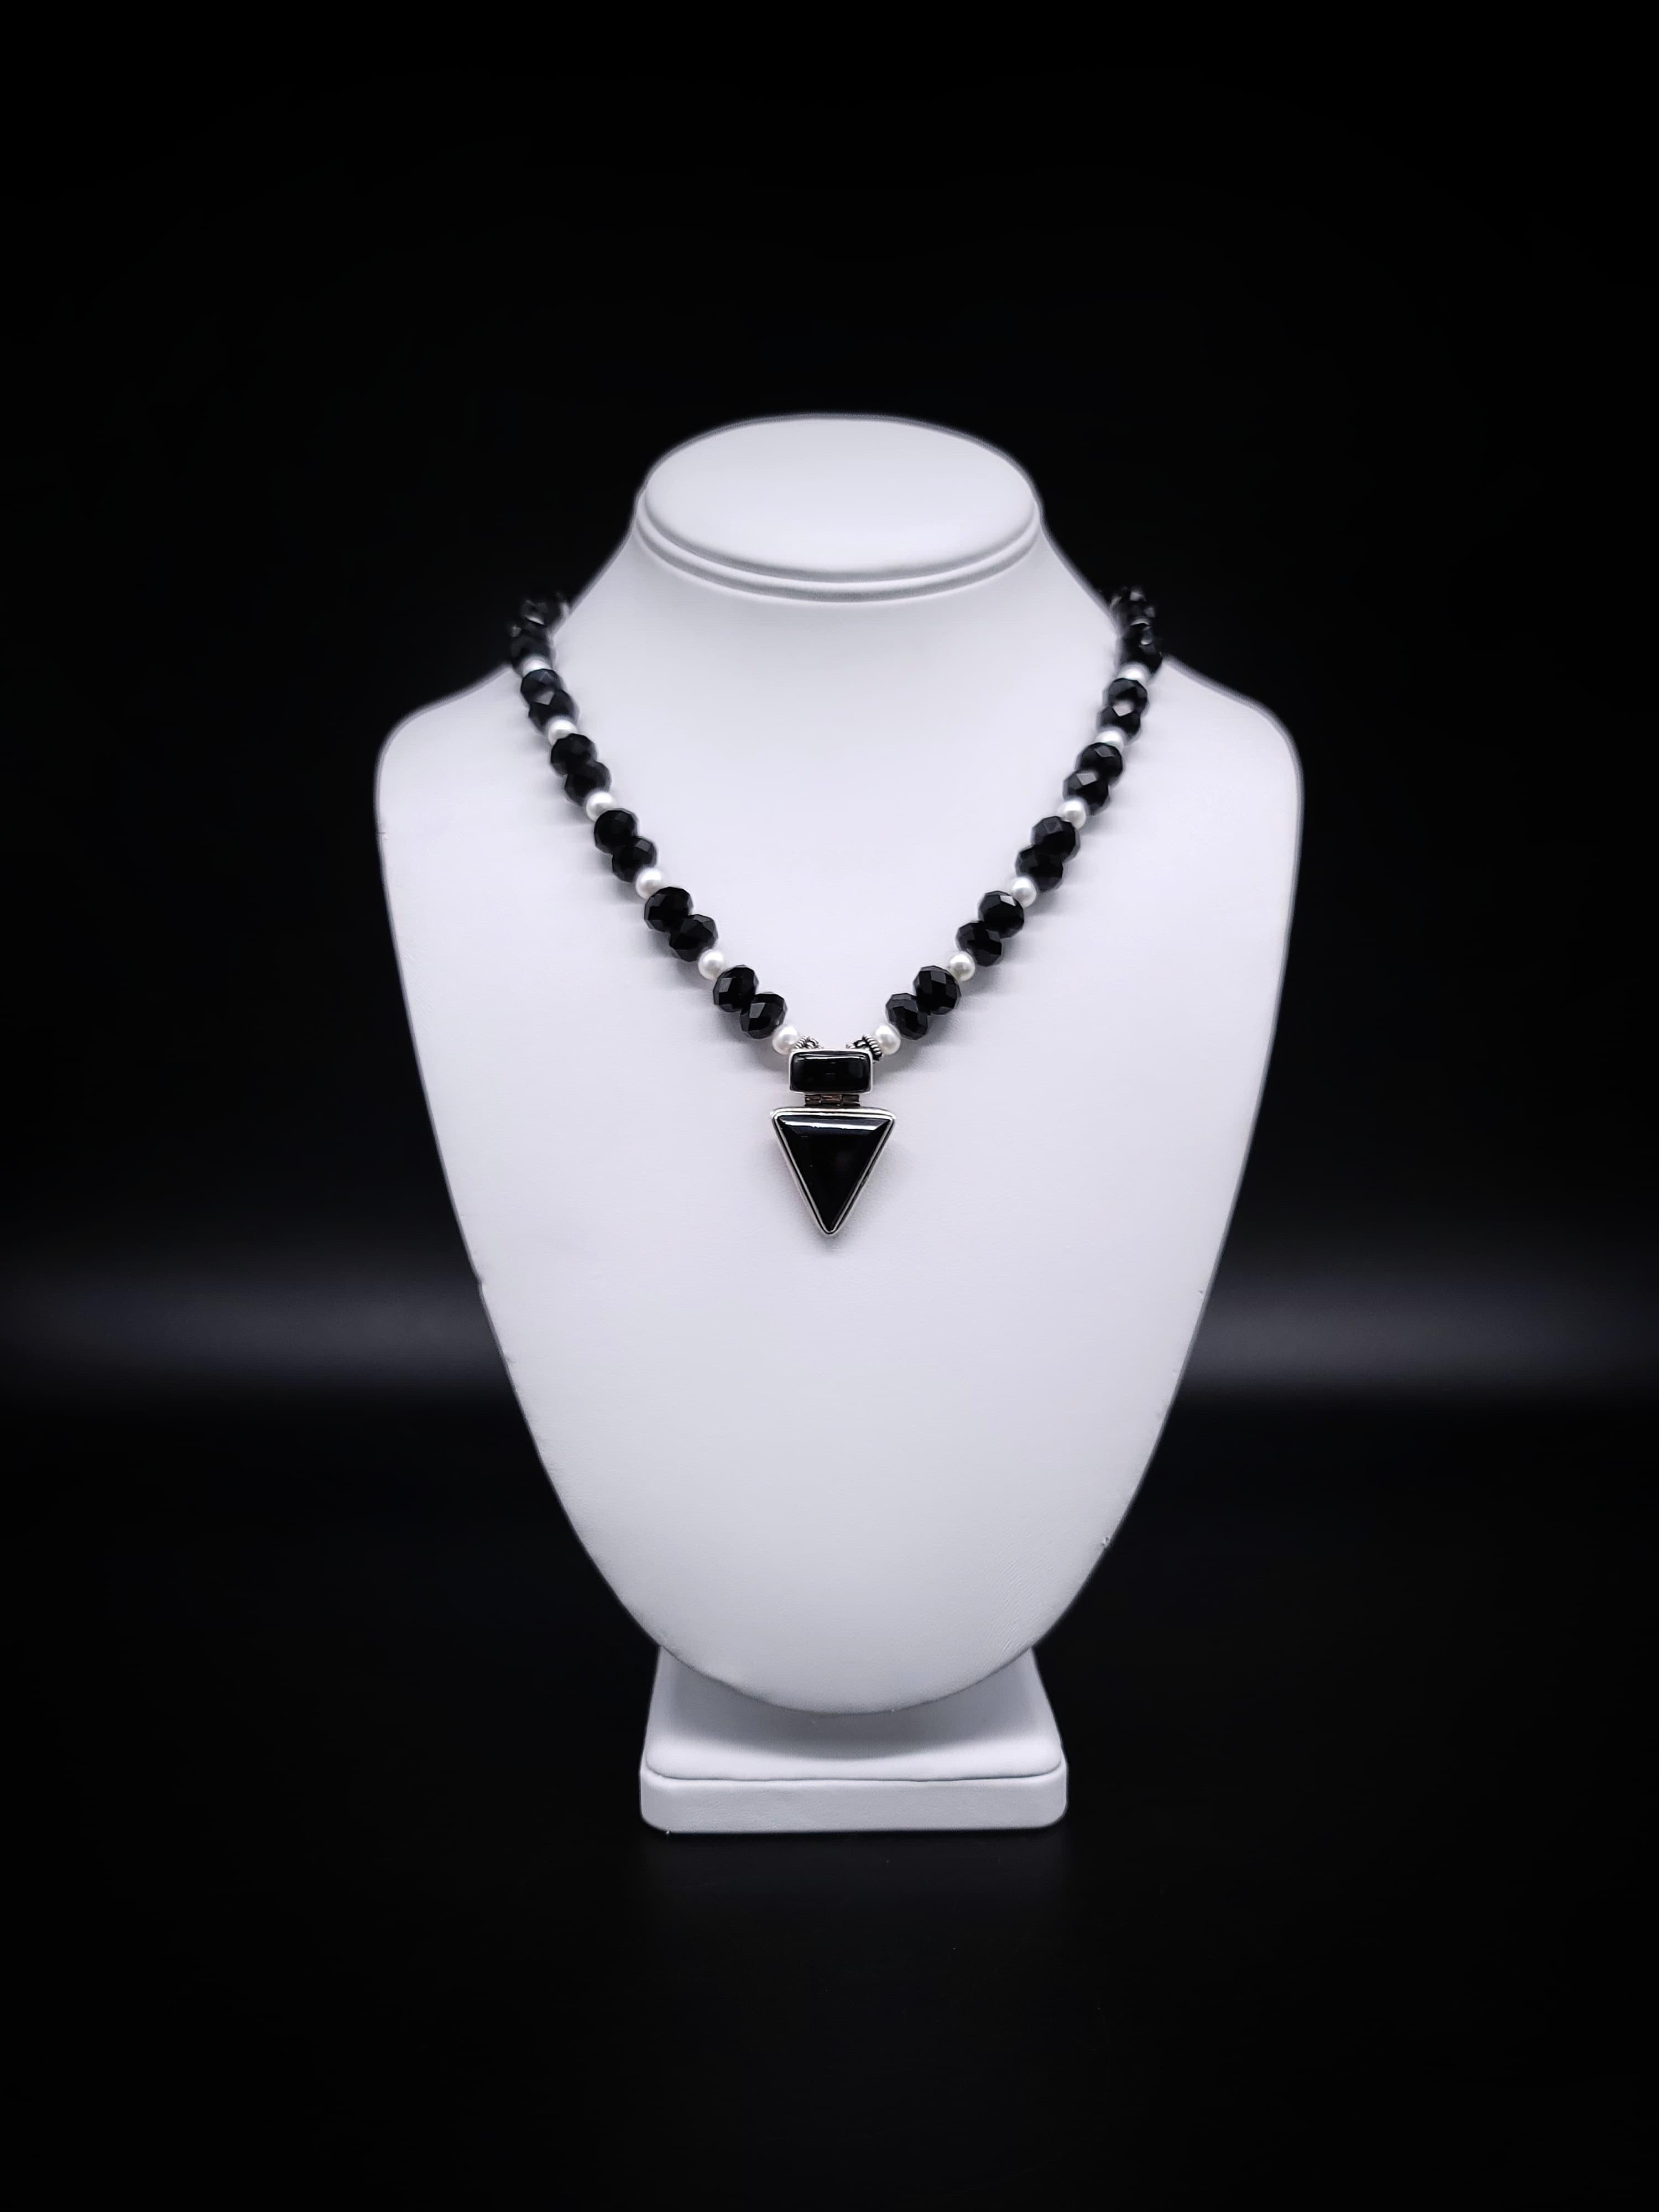 One-of-a-Kind

Introducing a uniquely captivating unisex necklace featuring faceted onyx beads, adorned with freshwater pearl spacers, and crowned by an inverted triangular onyx pendant, all set in sterling silver.
The necklace begins with a